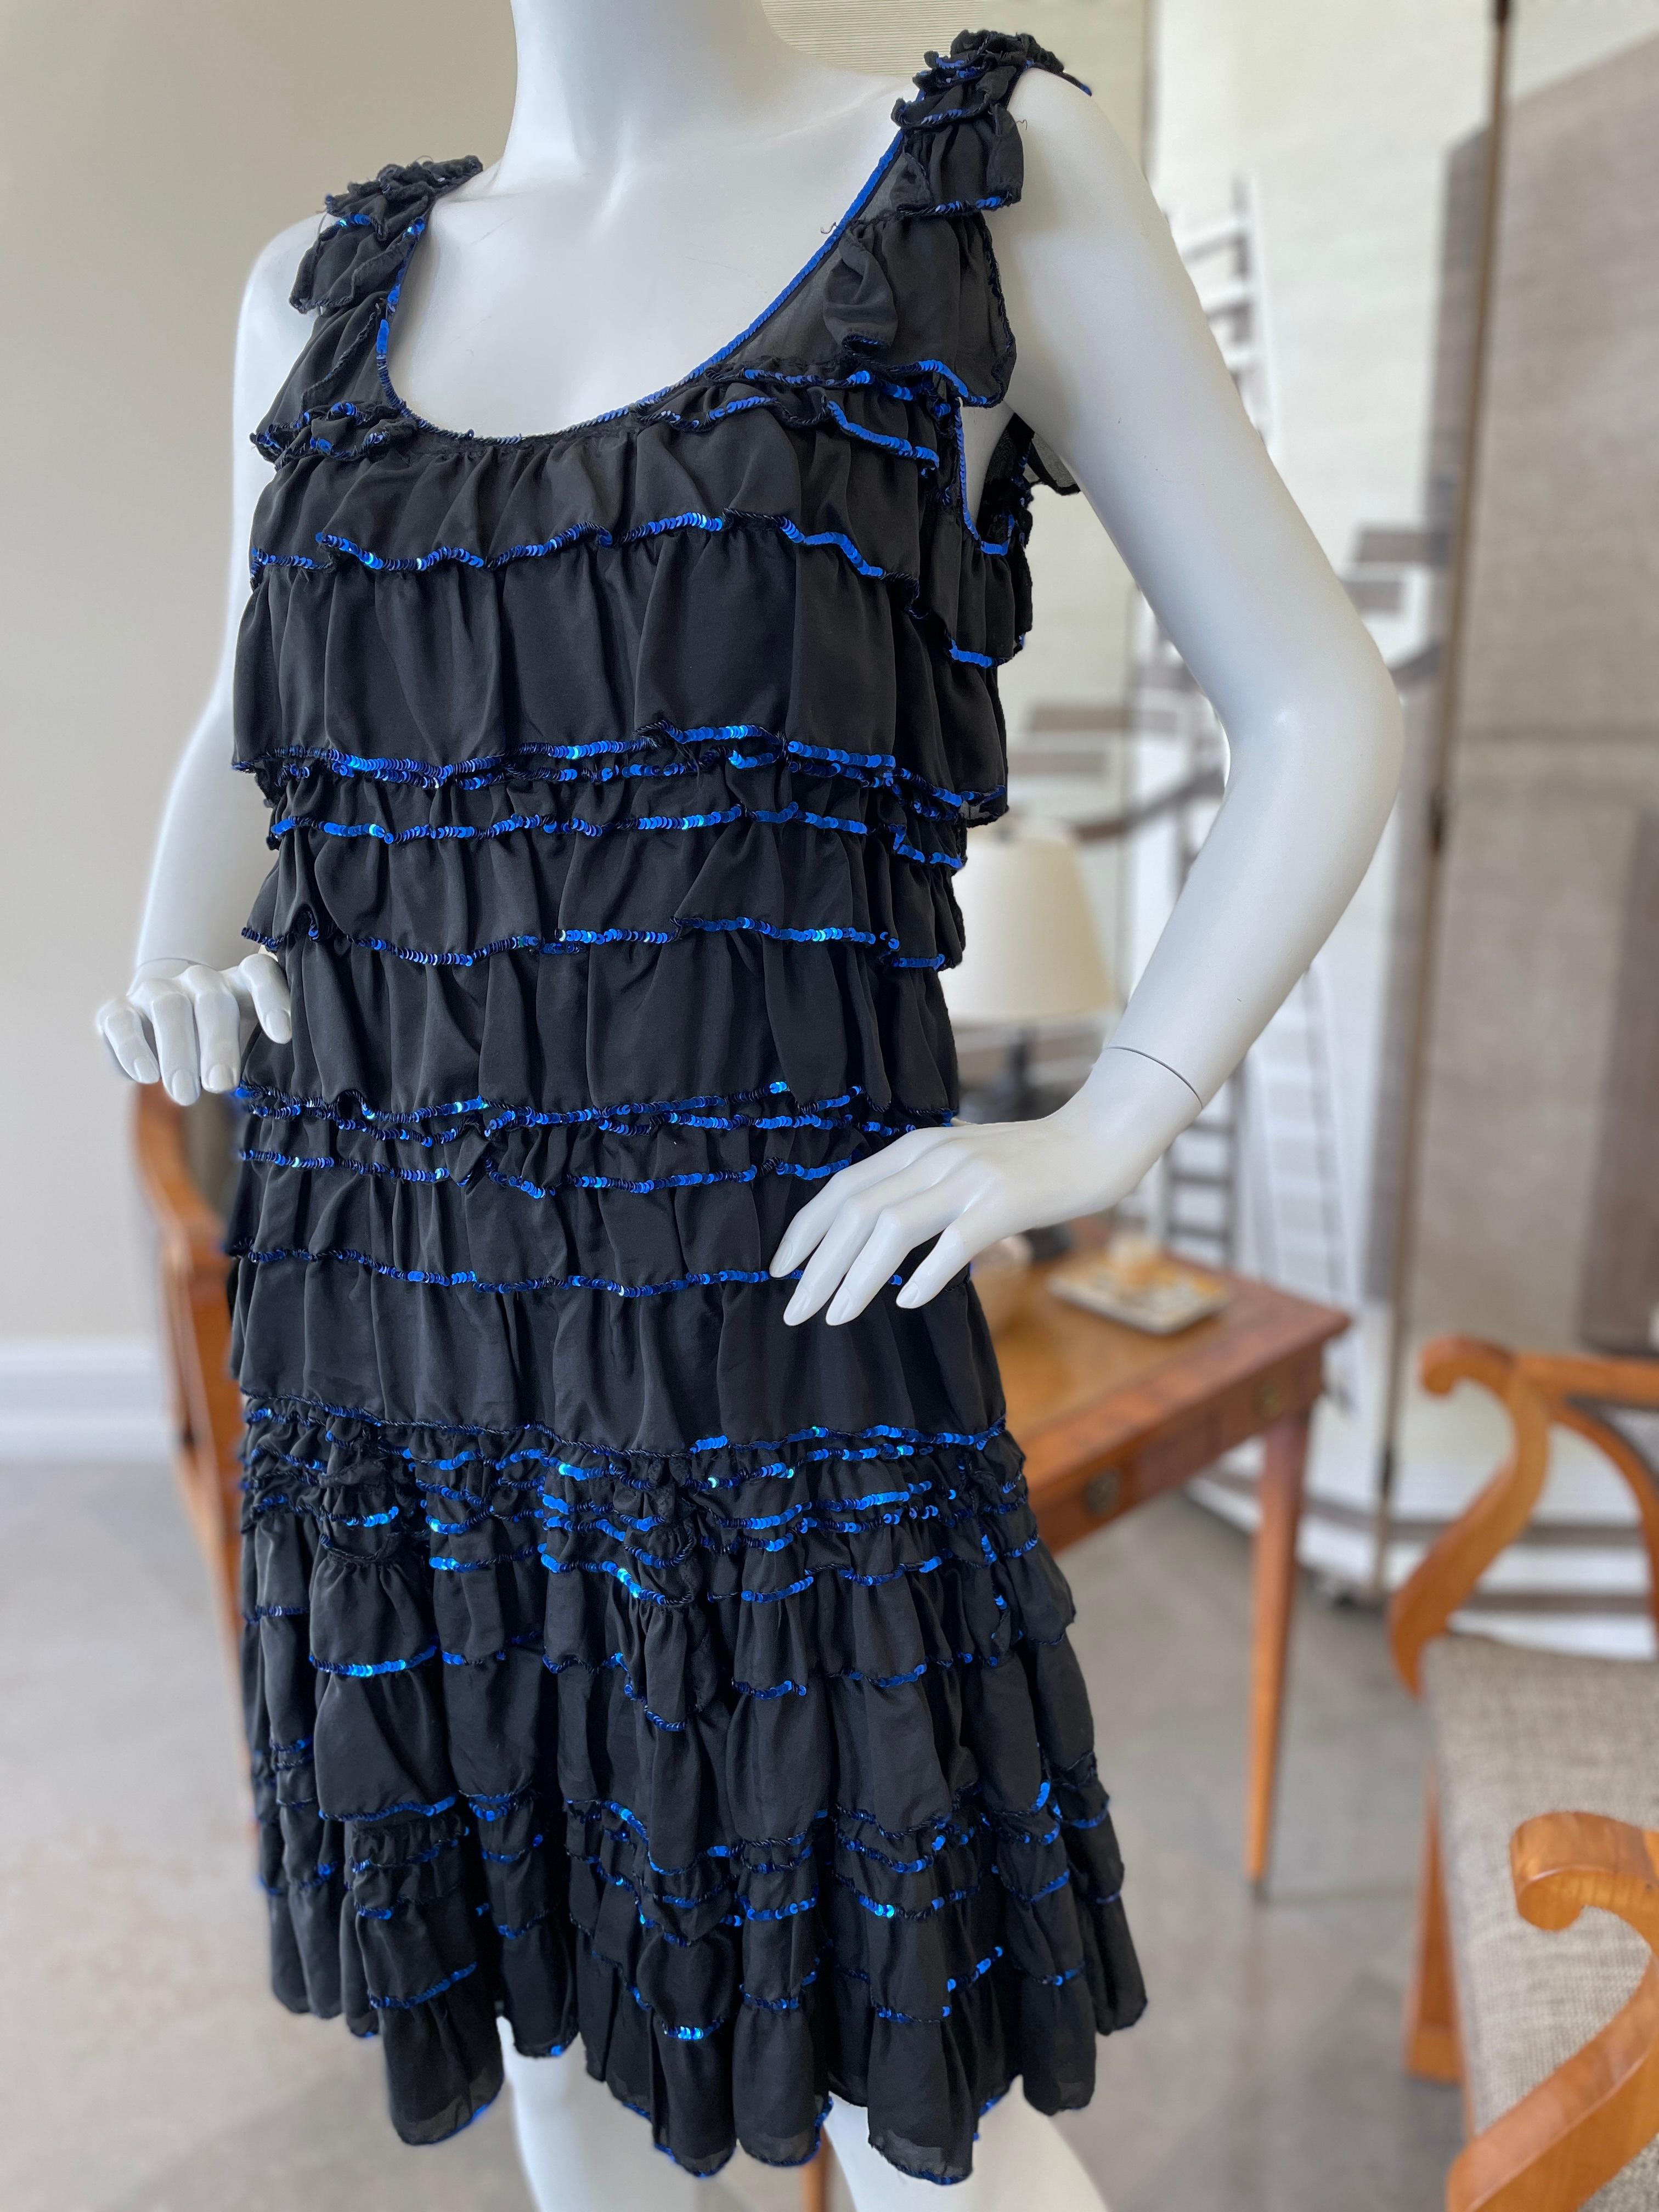 Lanvin by Alber Elbaz Ete 2004 Black Ruffle Cocktail Dress with Blue Sequin Trim In Excellent Condition For Sale In Cloverdale, CA